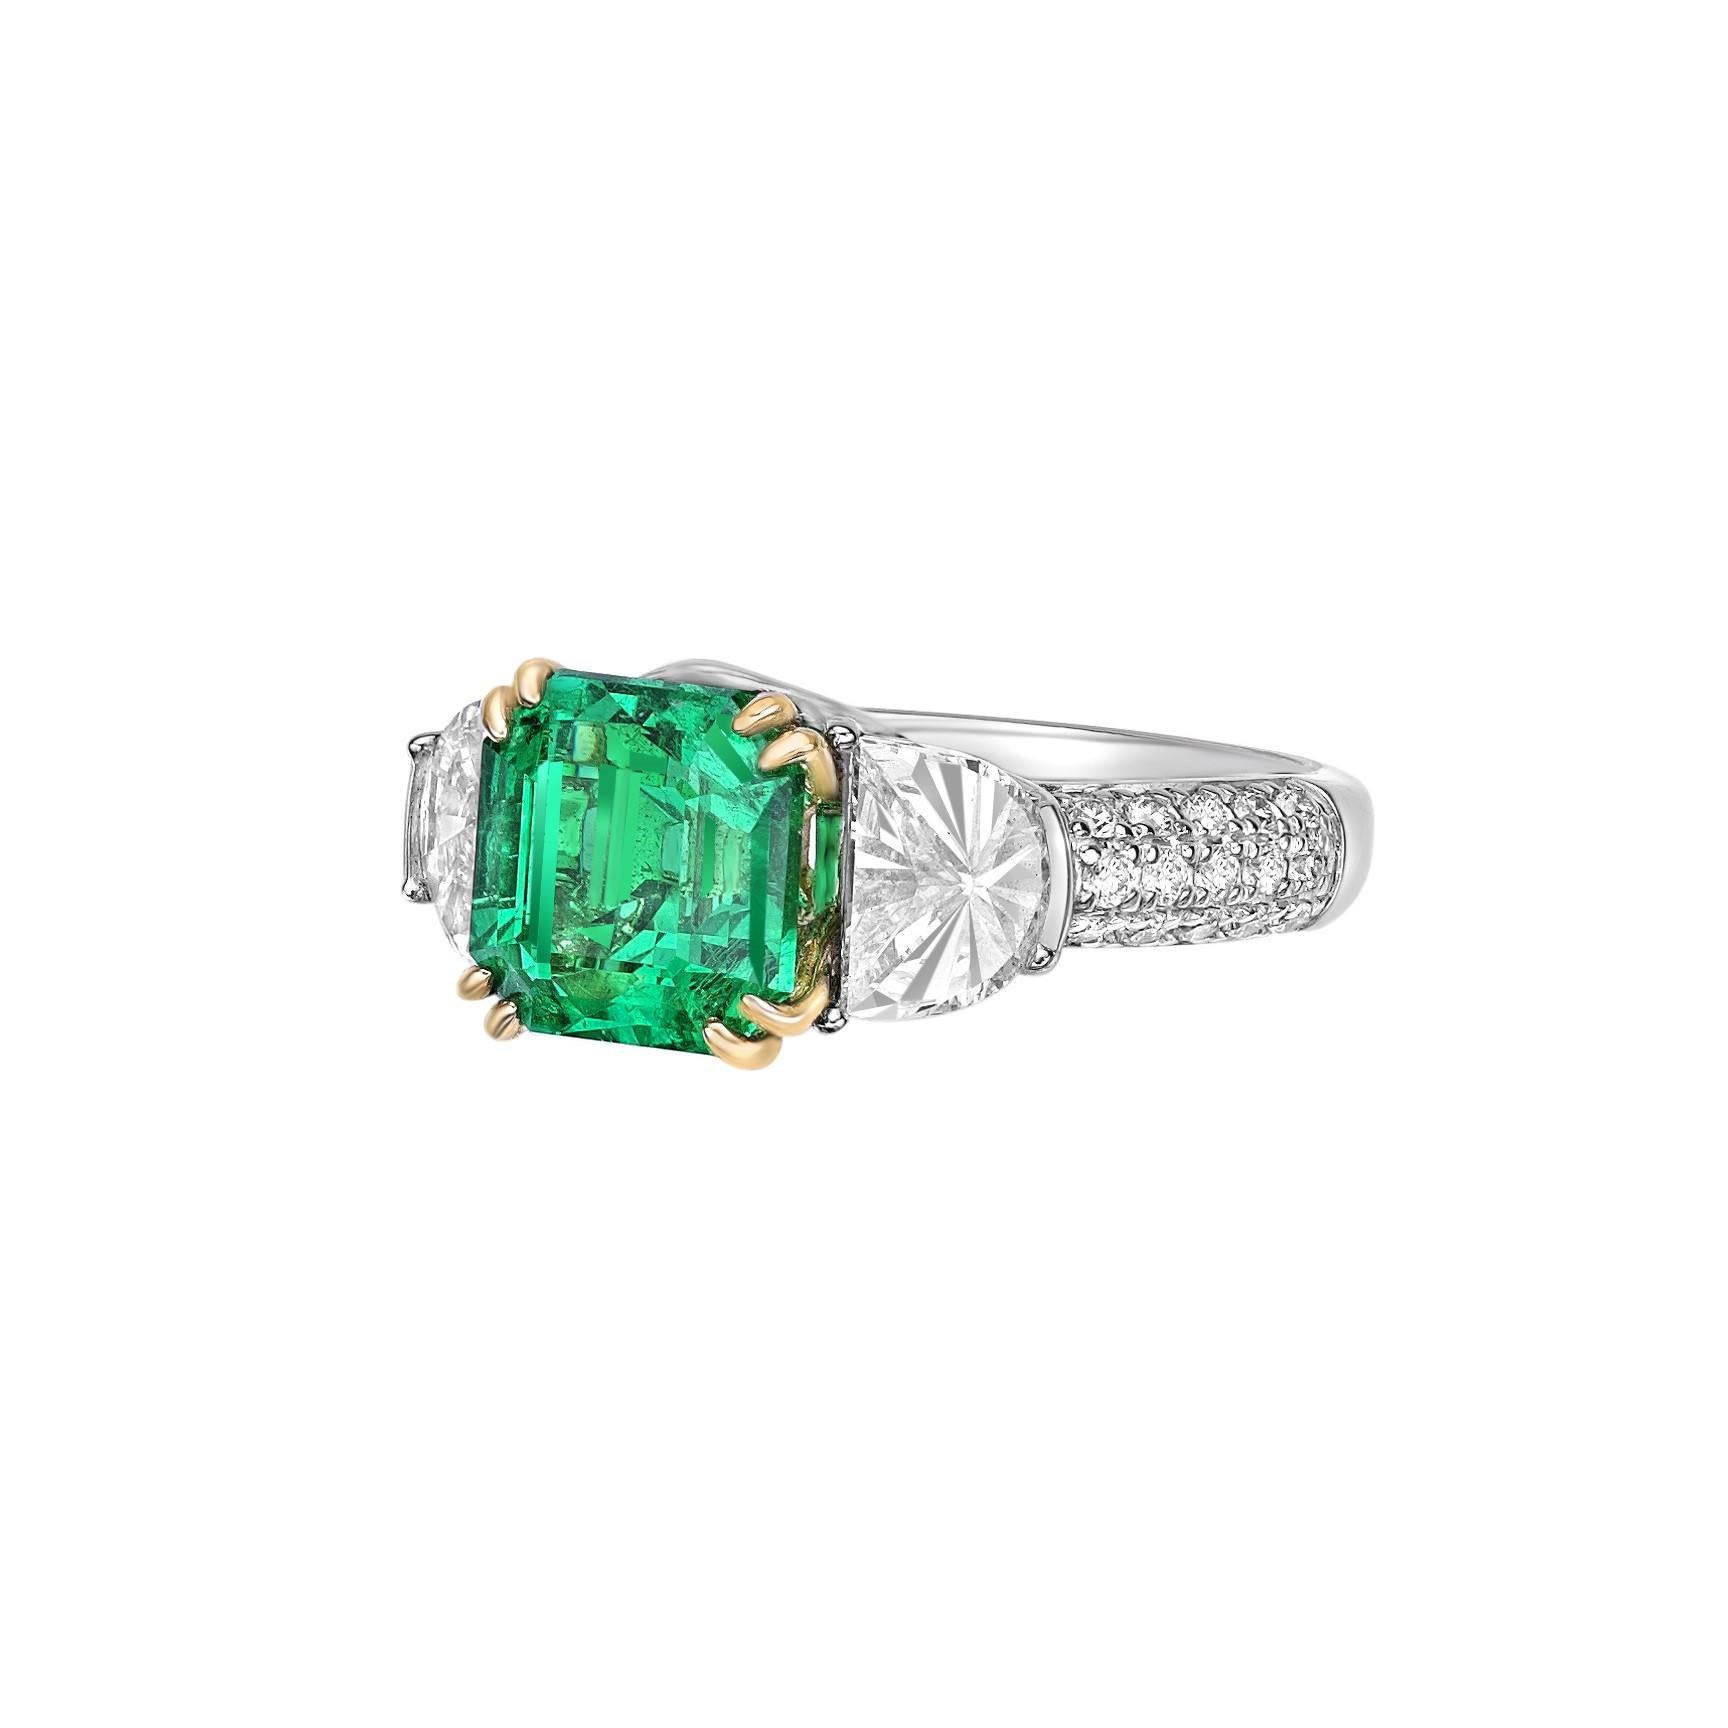 Octagon Cut 2.62 Carat Emerald Fancy Ring in 18Karat White Yellow Gold with White Diamond. For Sale